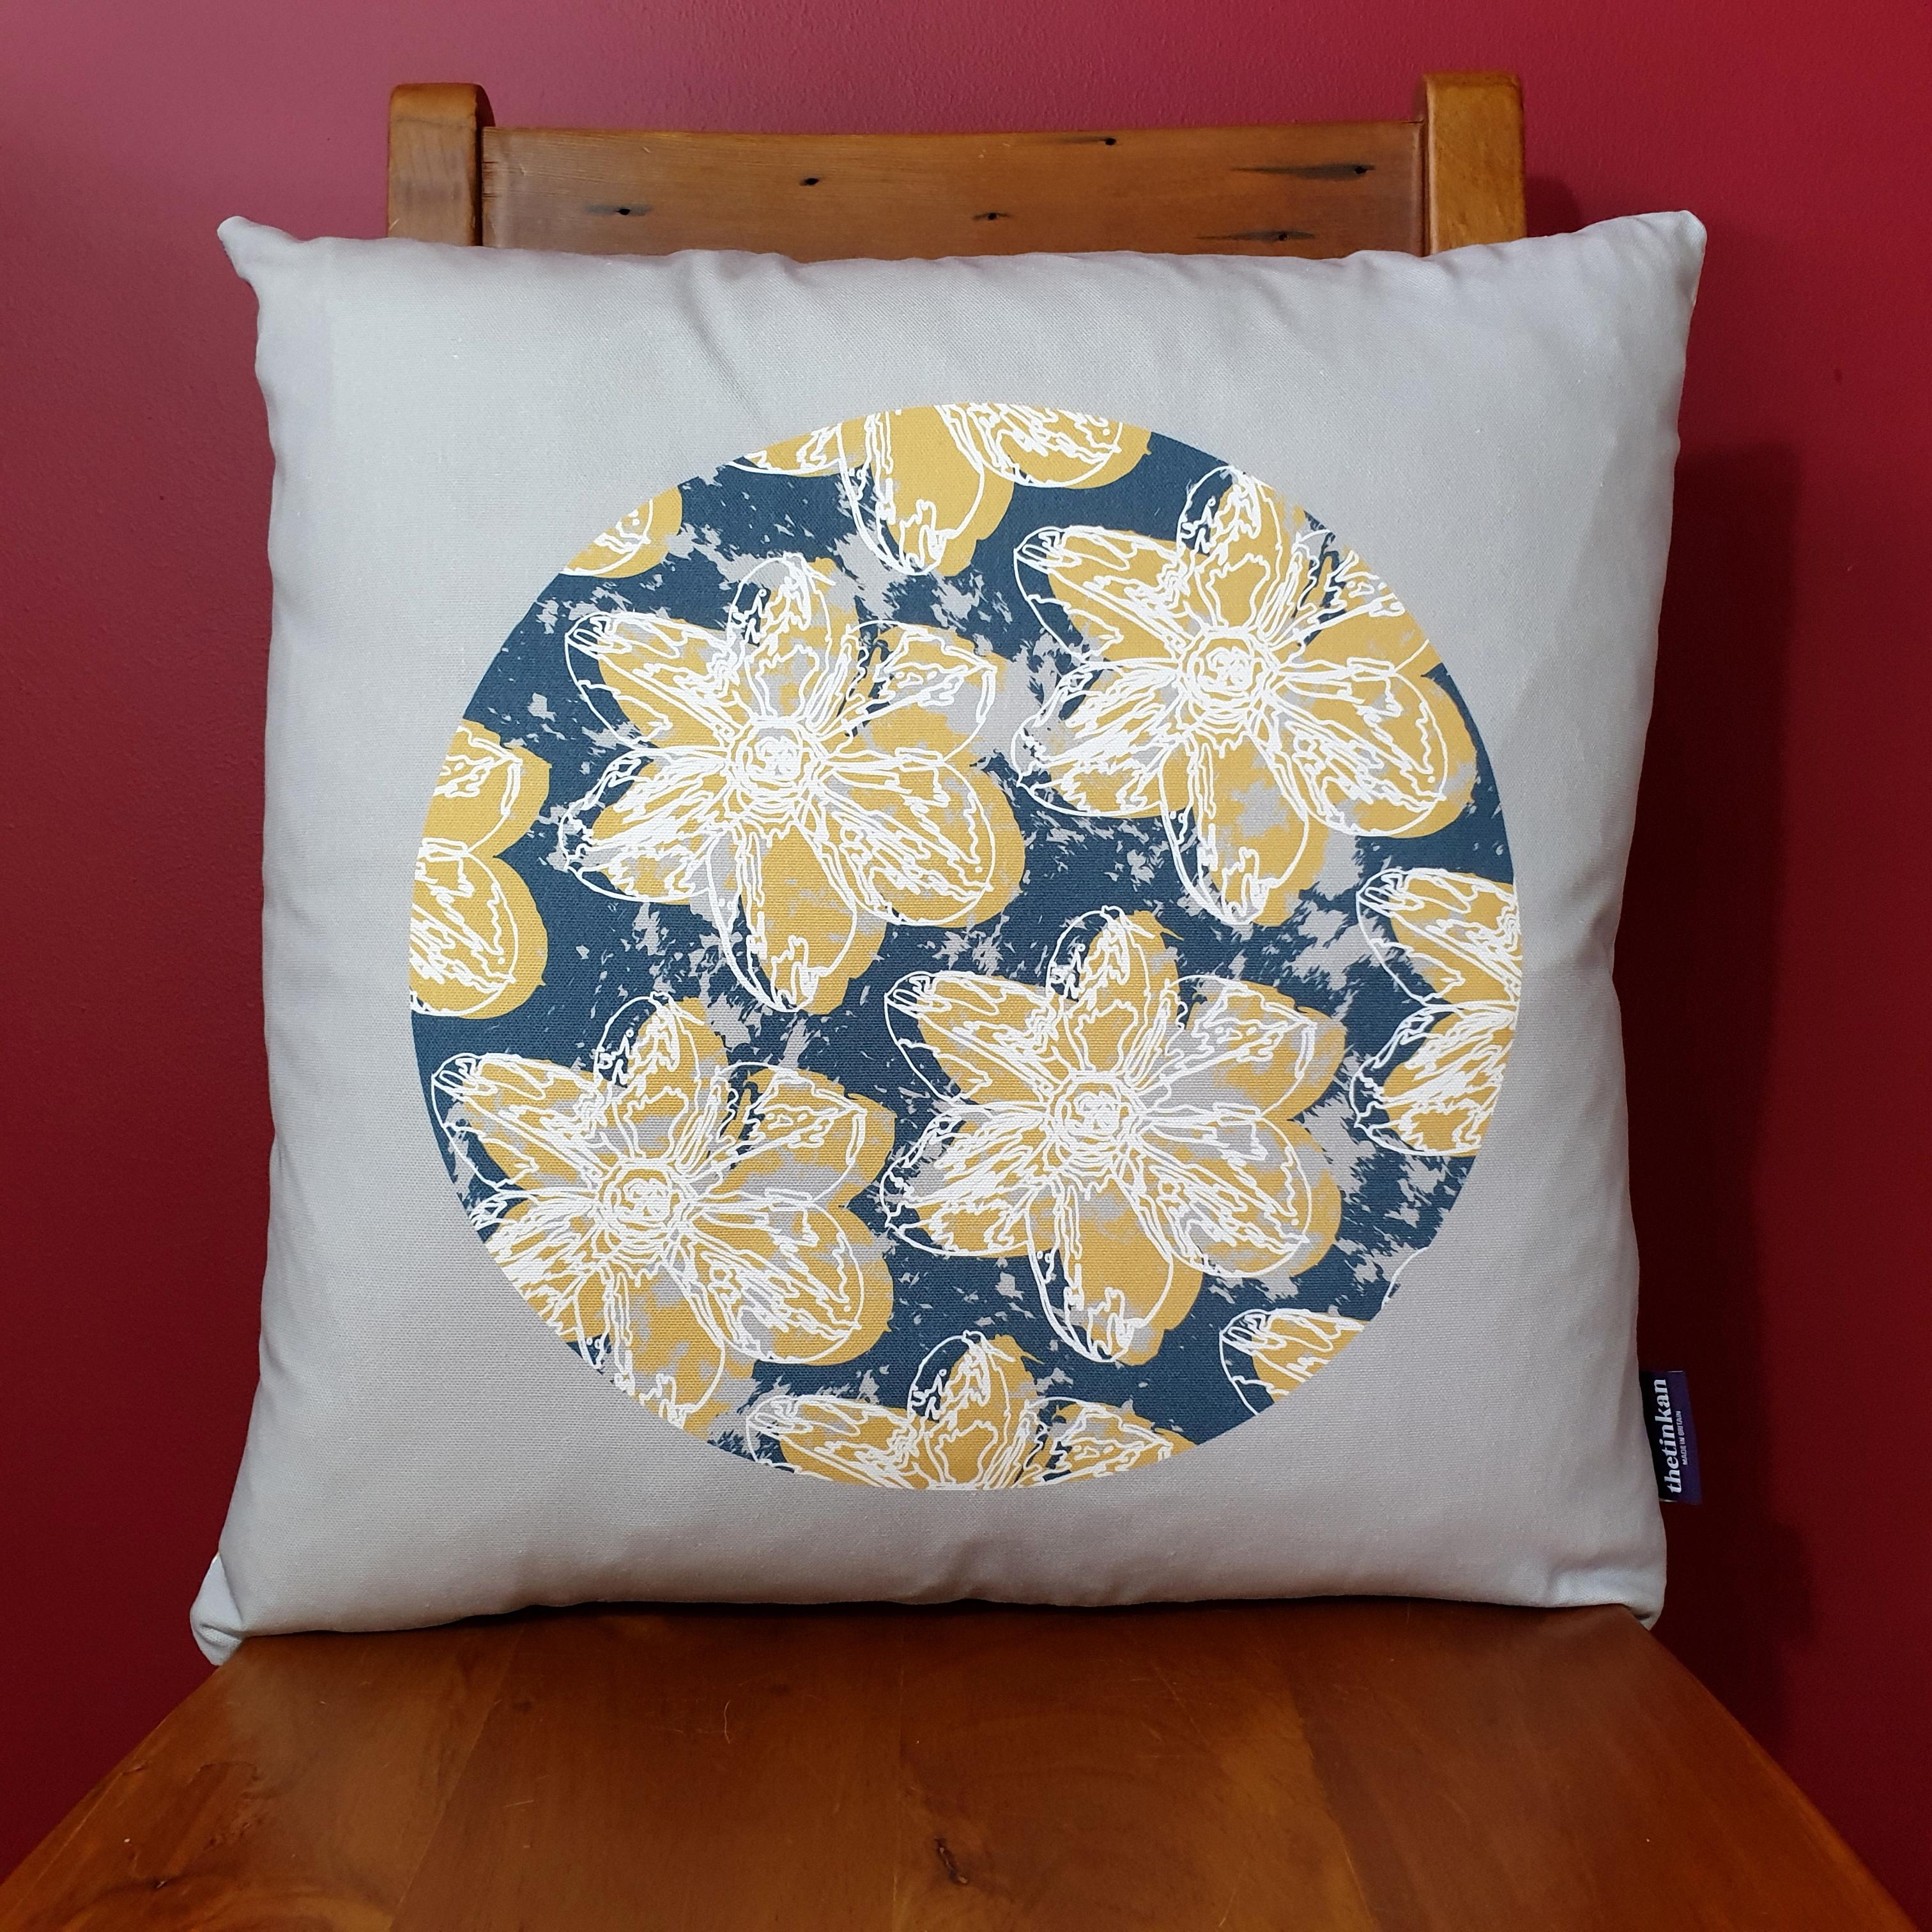 Double-sided 51cm square Flower Splash cushion designed by thetinkan. Mustard yellow narcissus flower with white traced outline set in an oxford blue coloured circle with pale grey paint splashes and pale grey surround. Available with an optional luxury cushion inner pad. VIEW PRODUCT >>